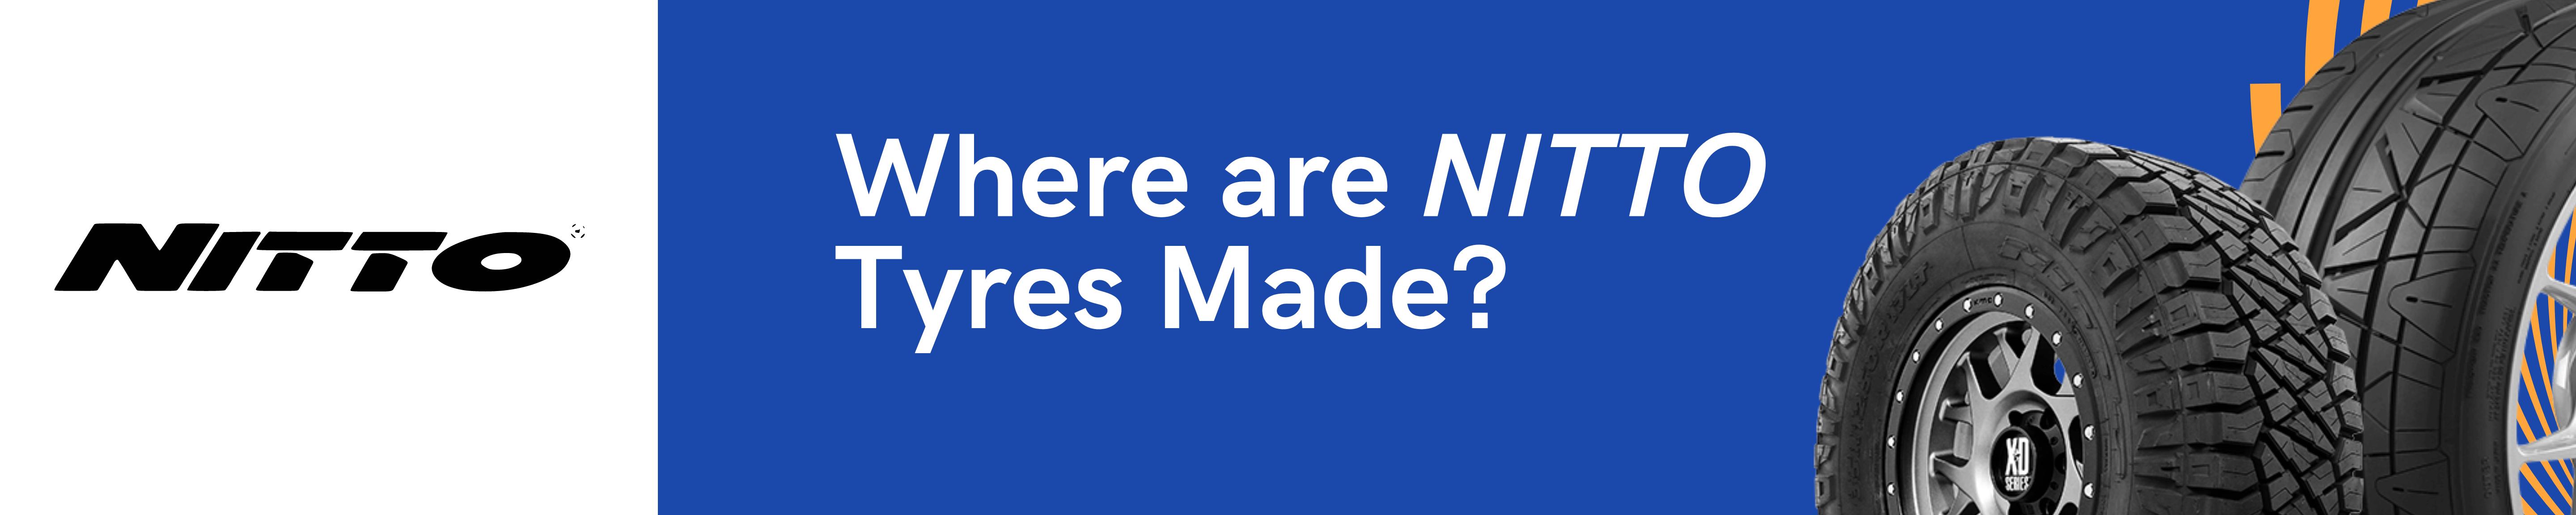 Where are Nitto Tyres Made?